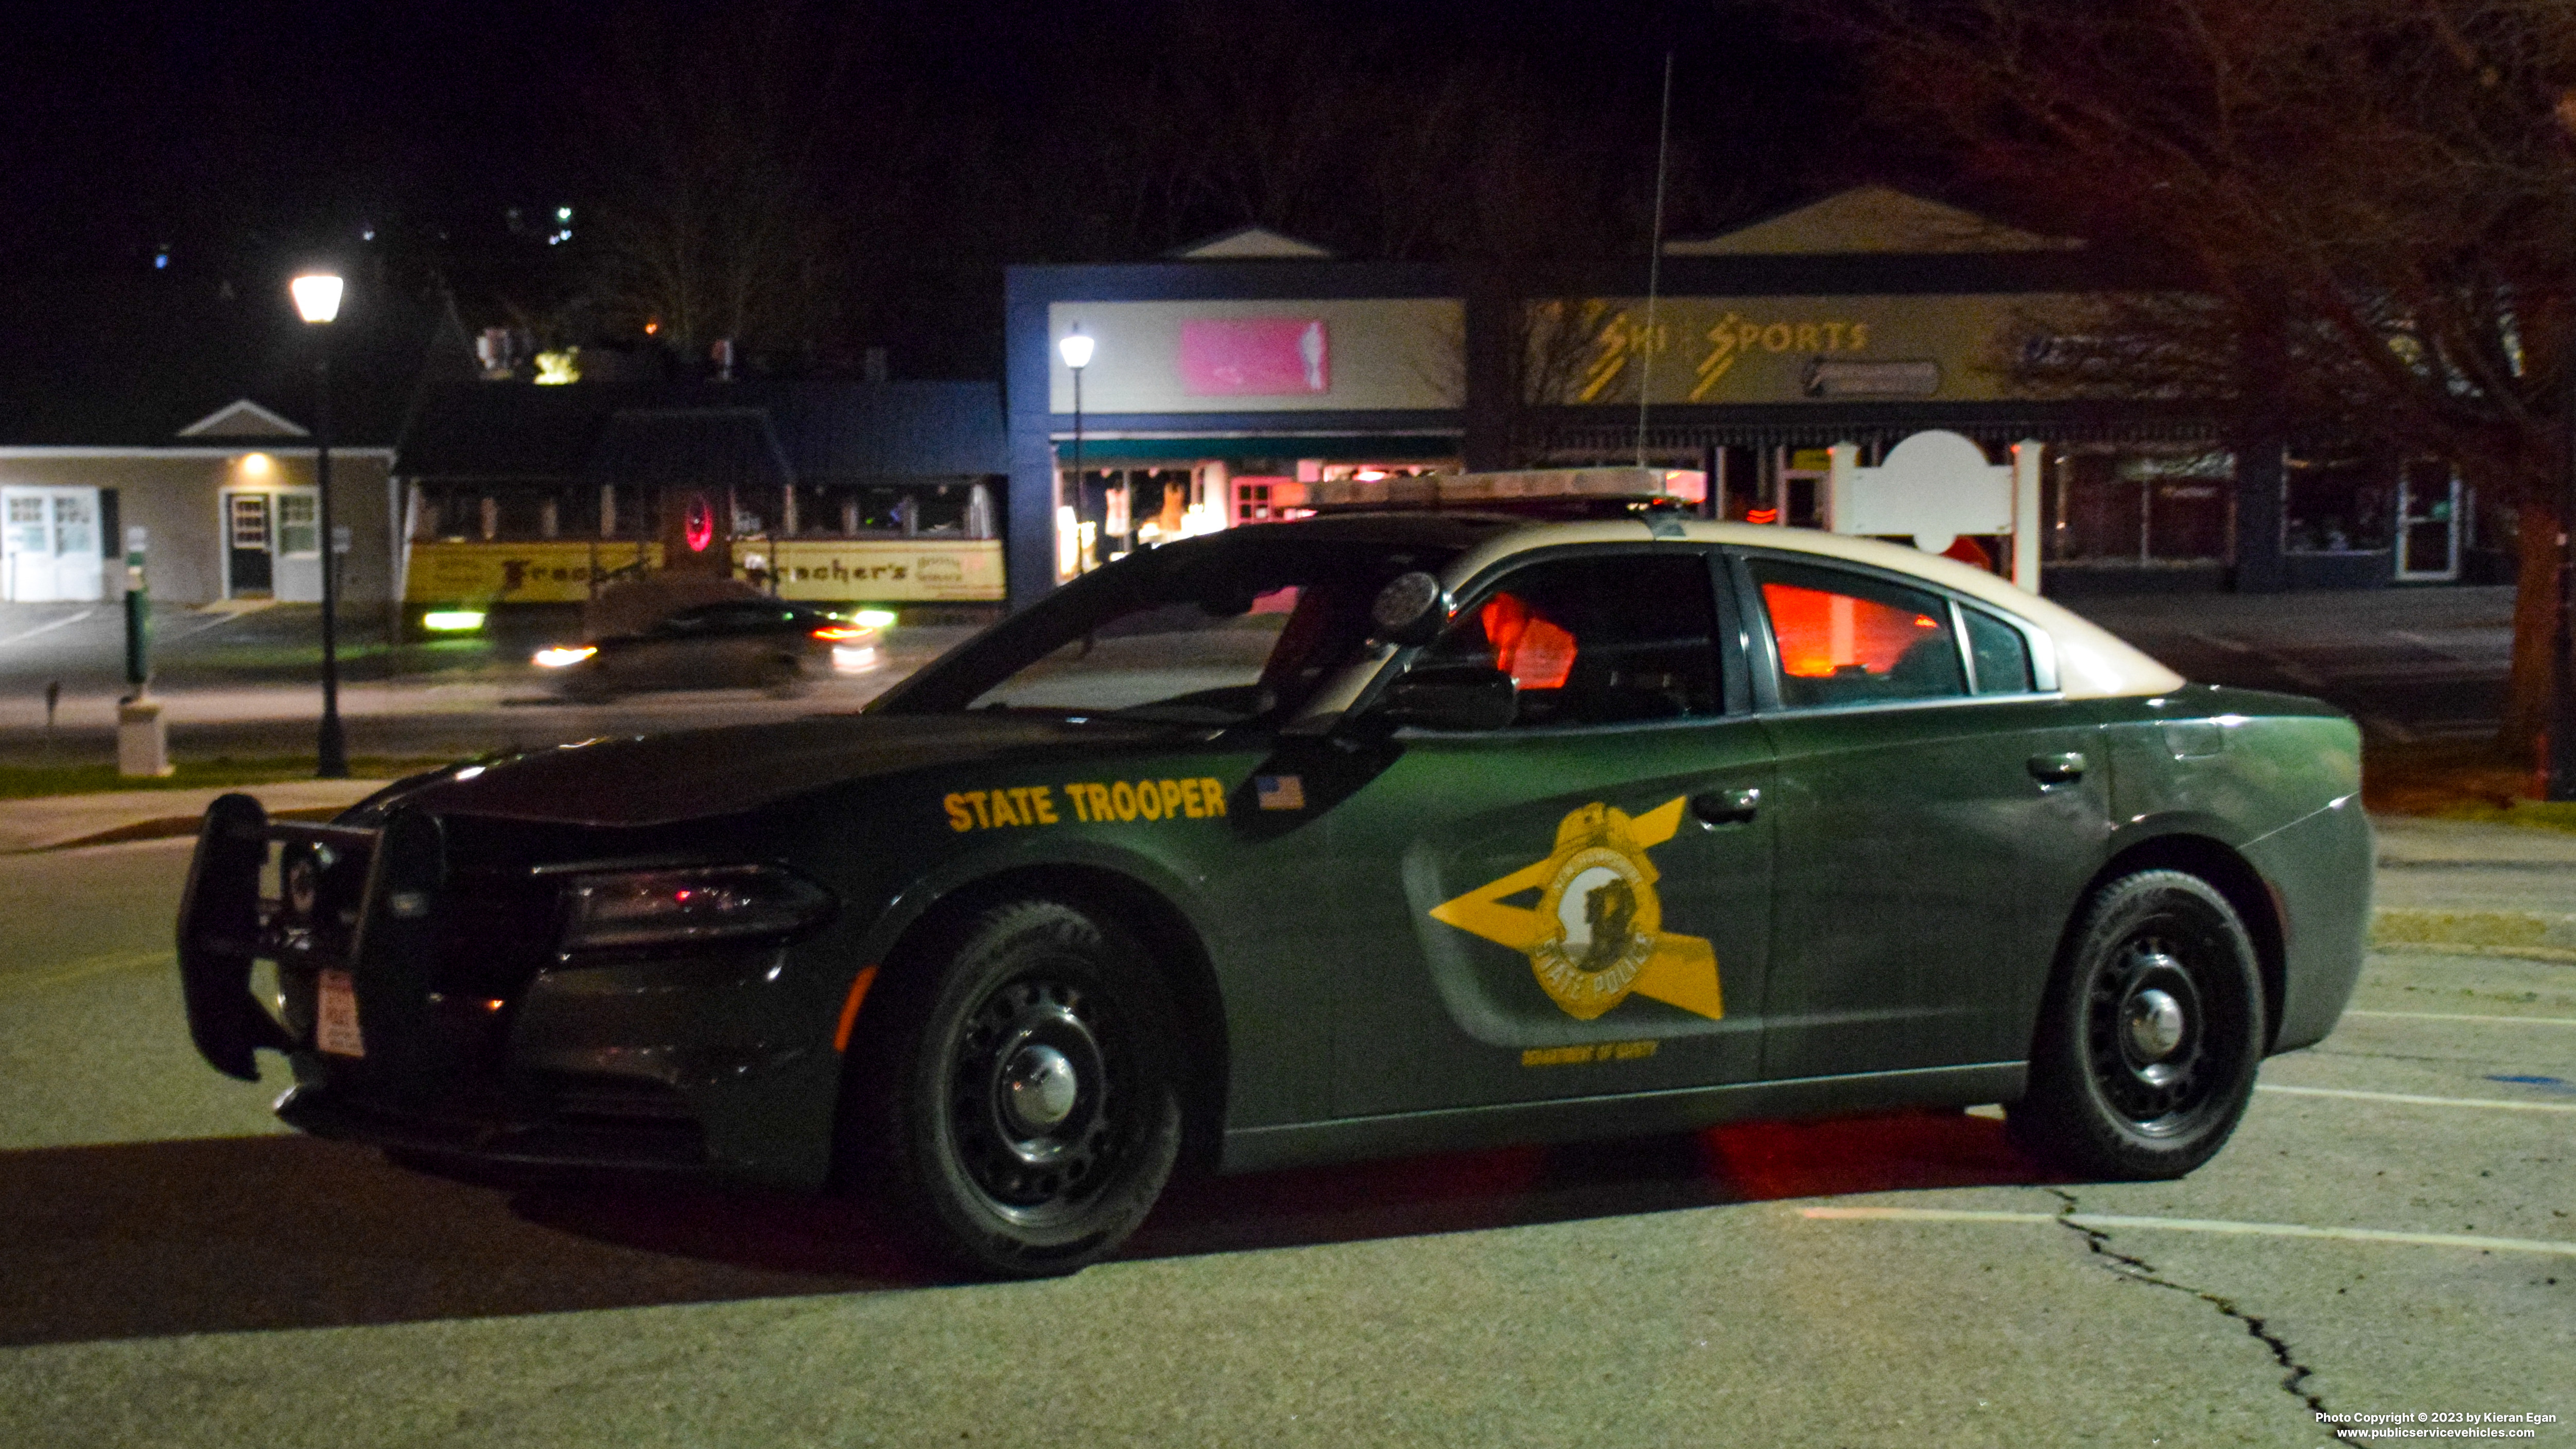 A photo  of New Hampshire State Police
            Cruiser 637, a 2015-2016 Dodge Charger             taken by Kieran Egan